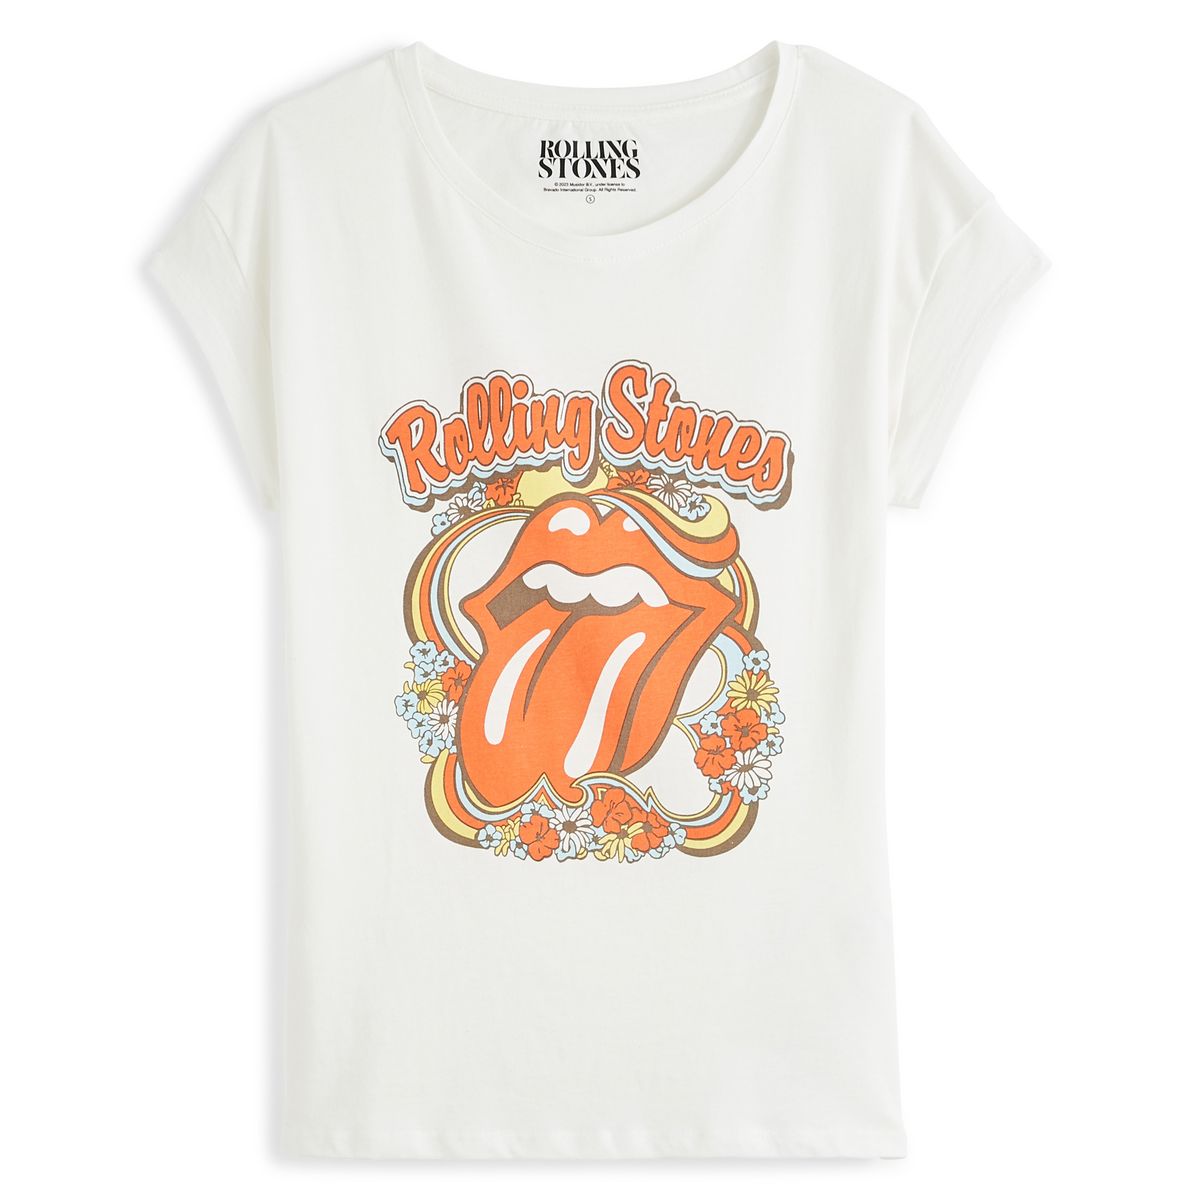 INEXTENSO T-shirt manches courtes blanc femme Rolling Stones